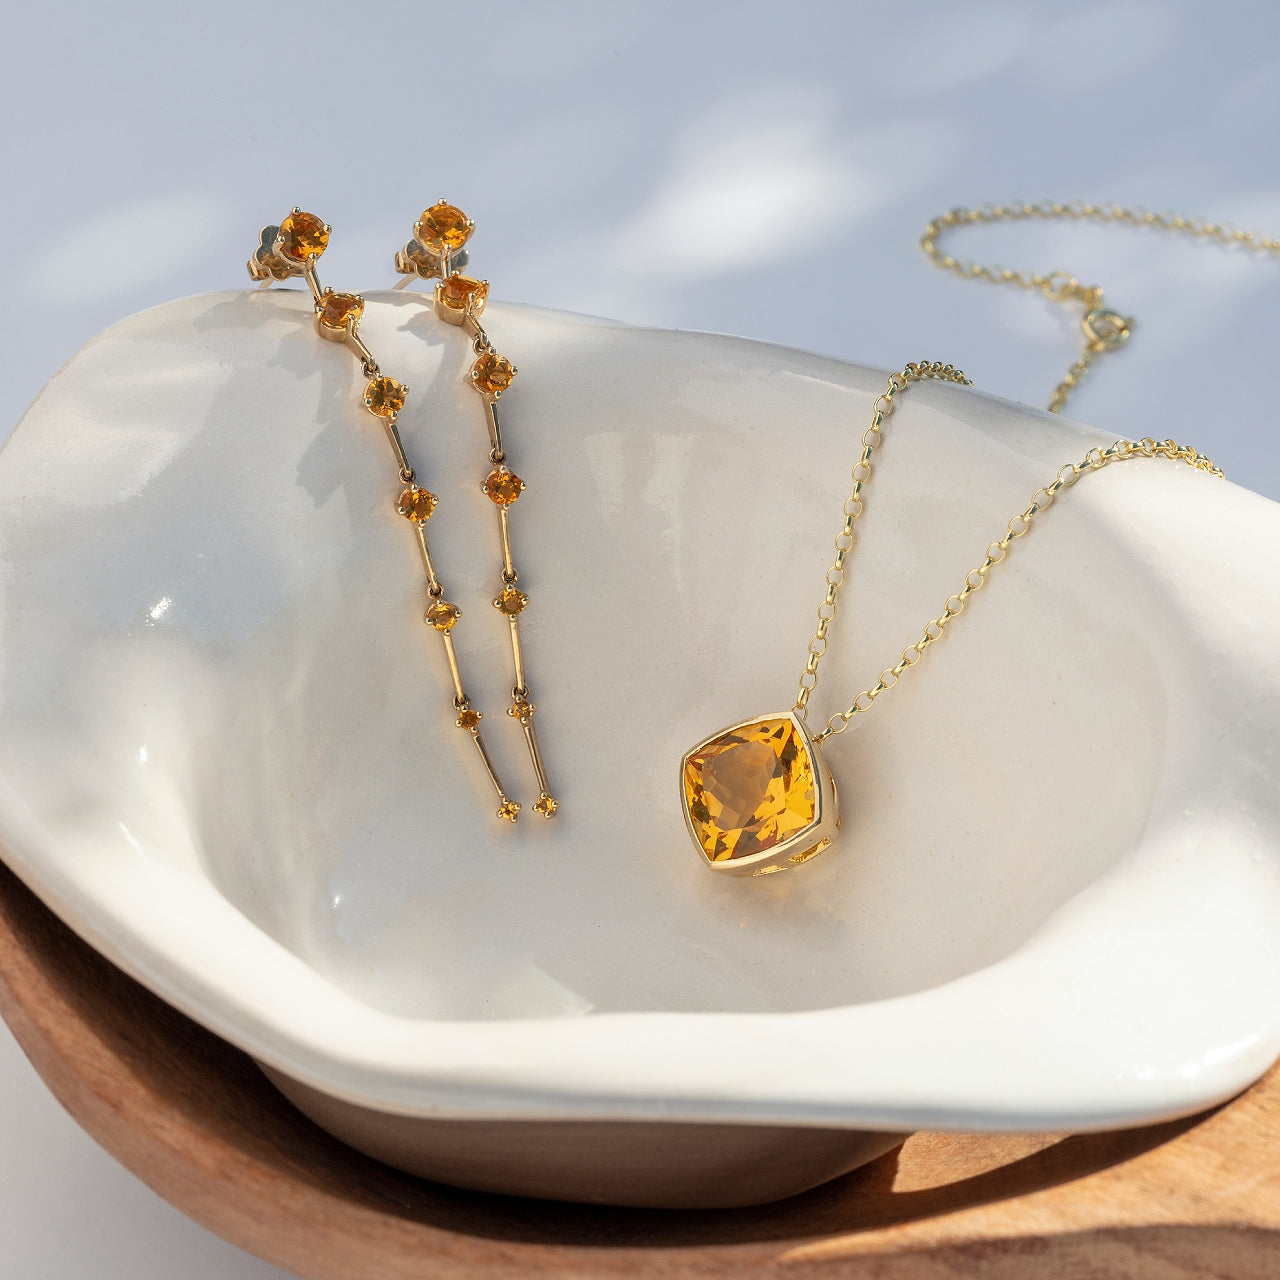 9ct Yellow Gold Articulated Drop Earrings with Citrine Rounds